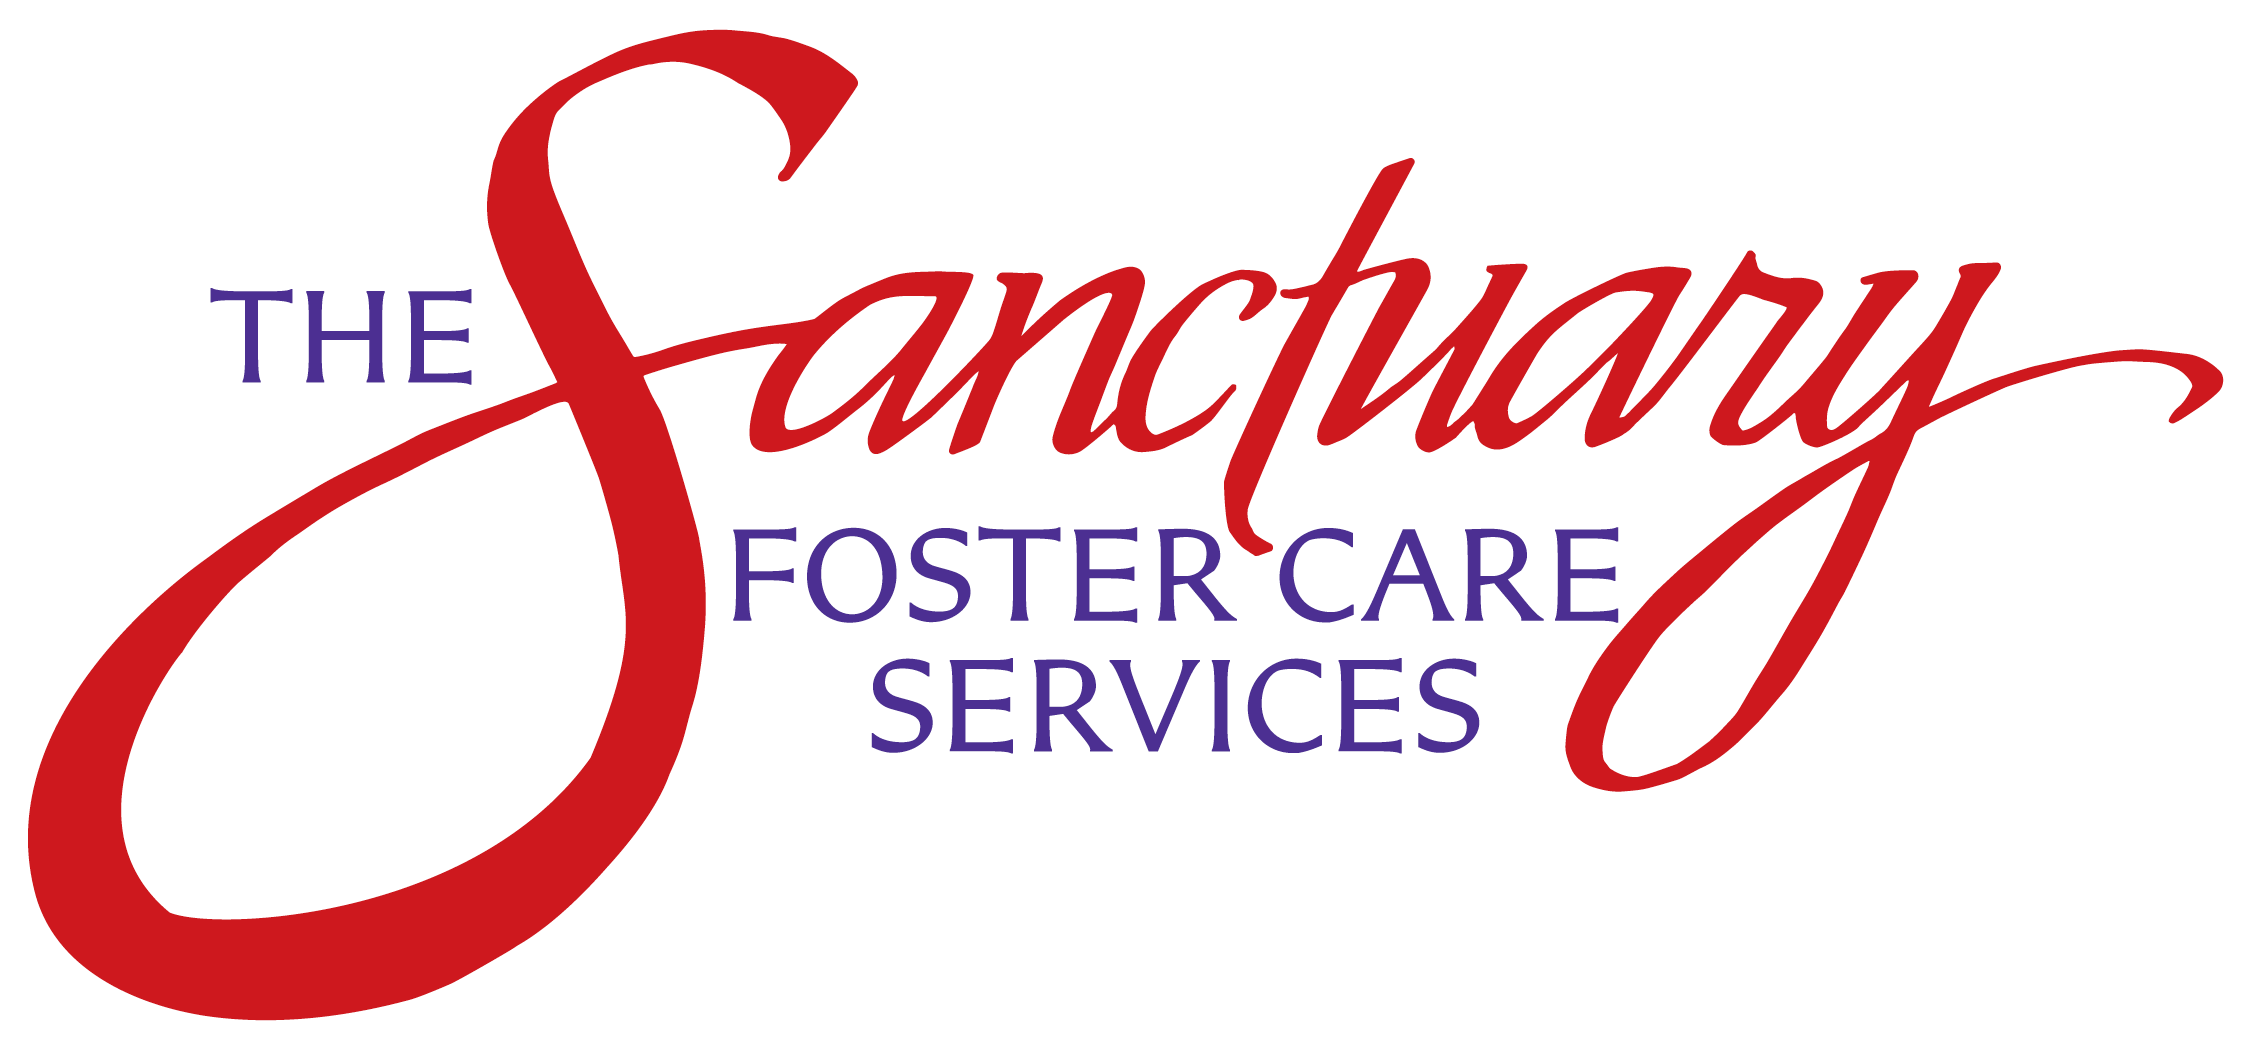 The Sanctuary Foster Care Services